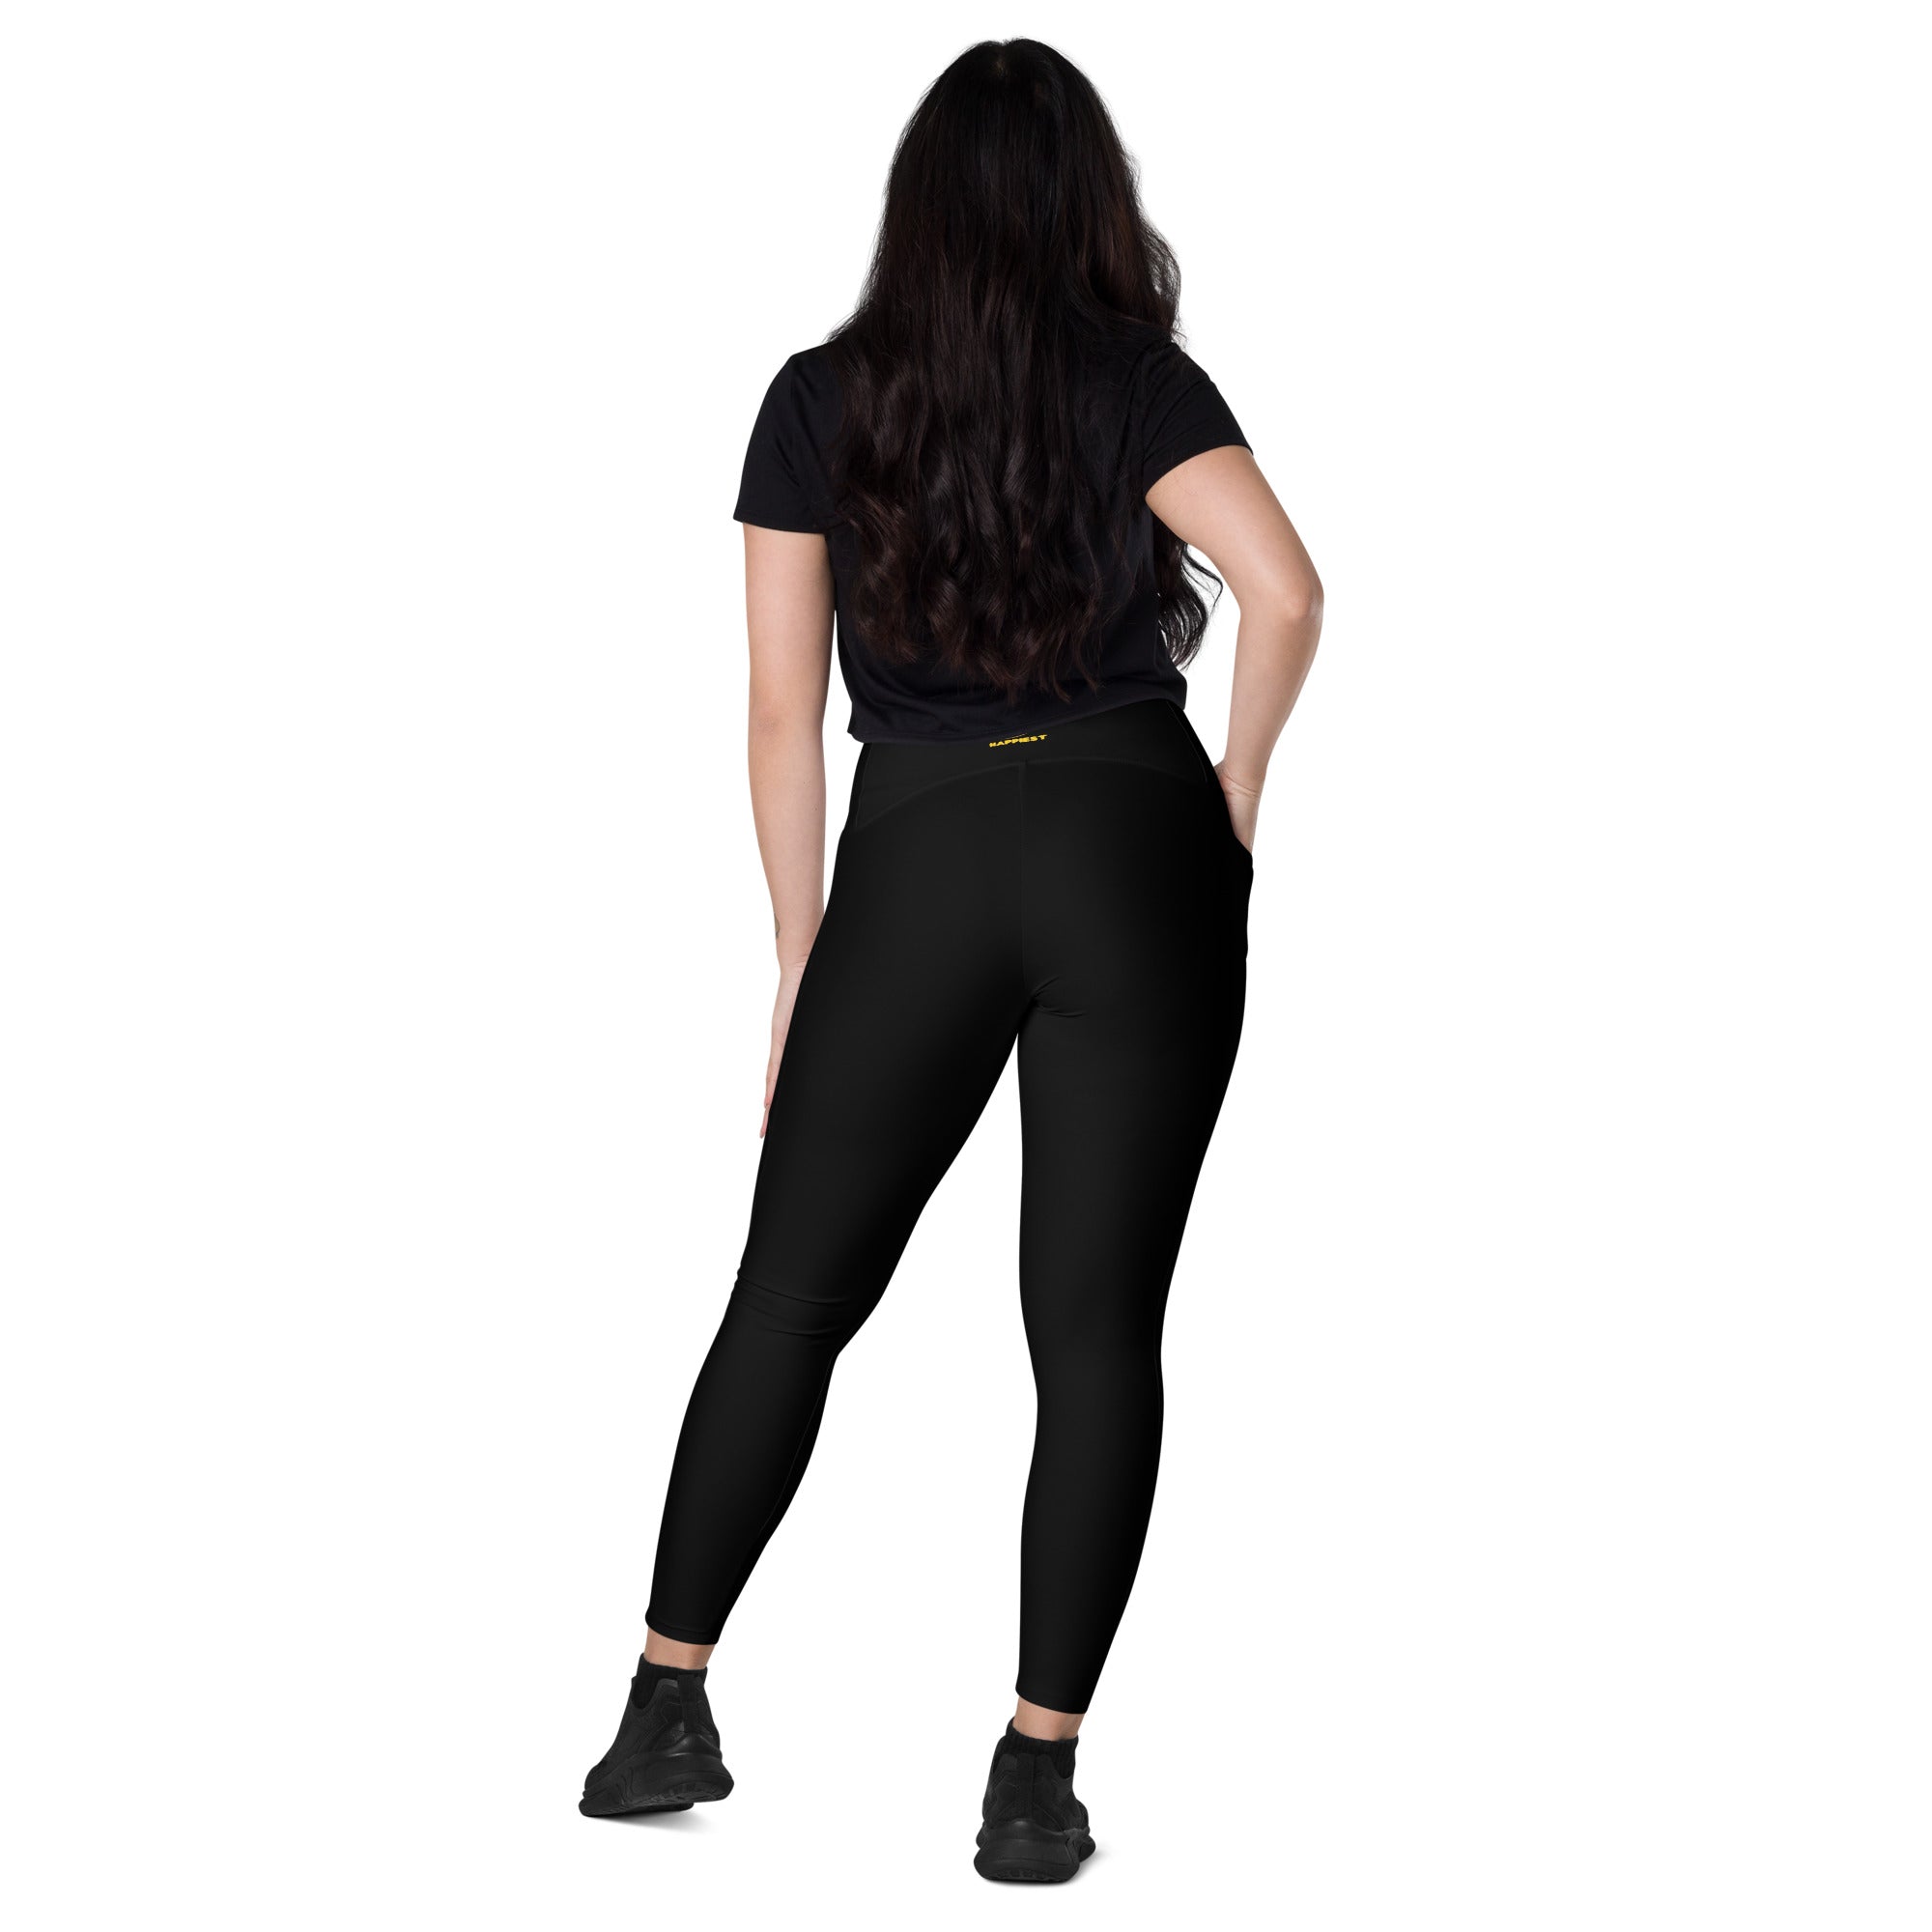 Happiest Black Leggings with pockets